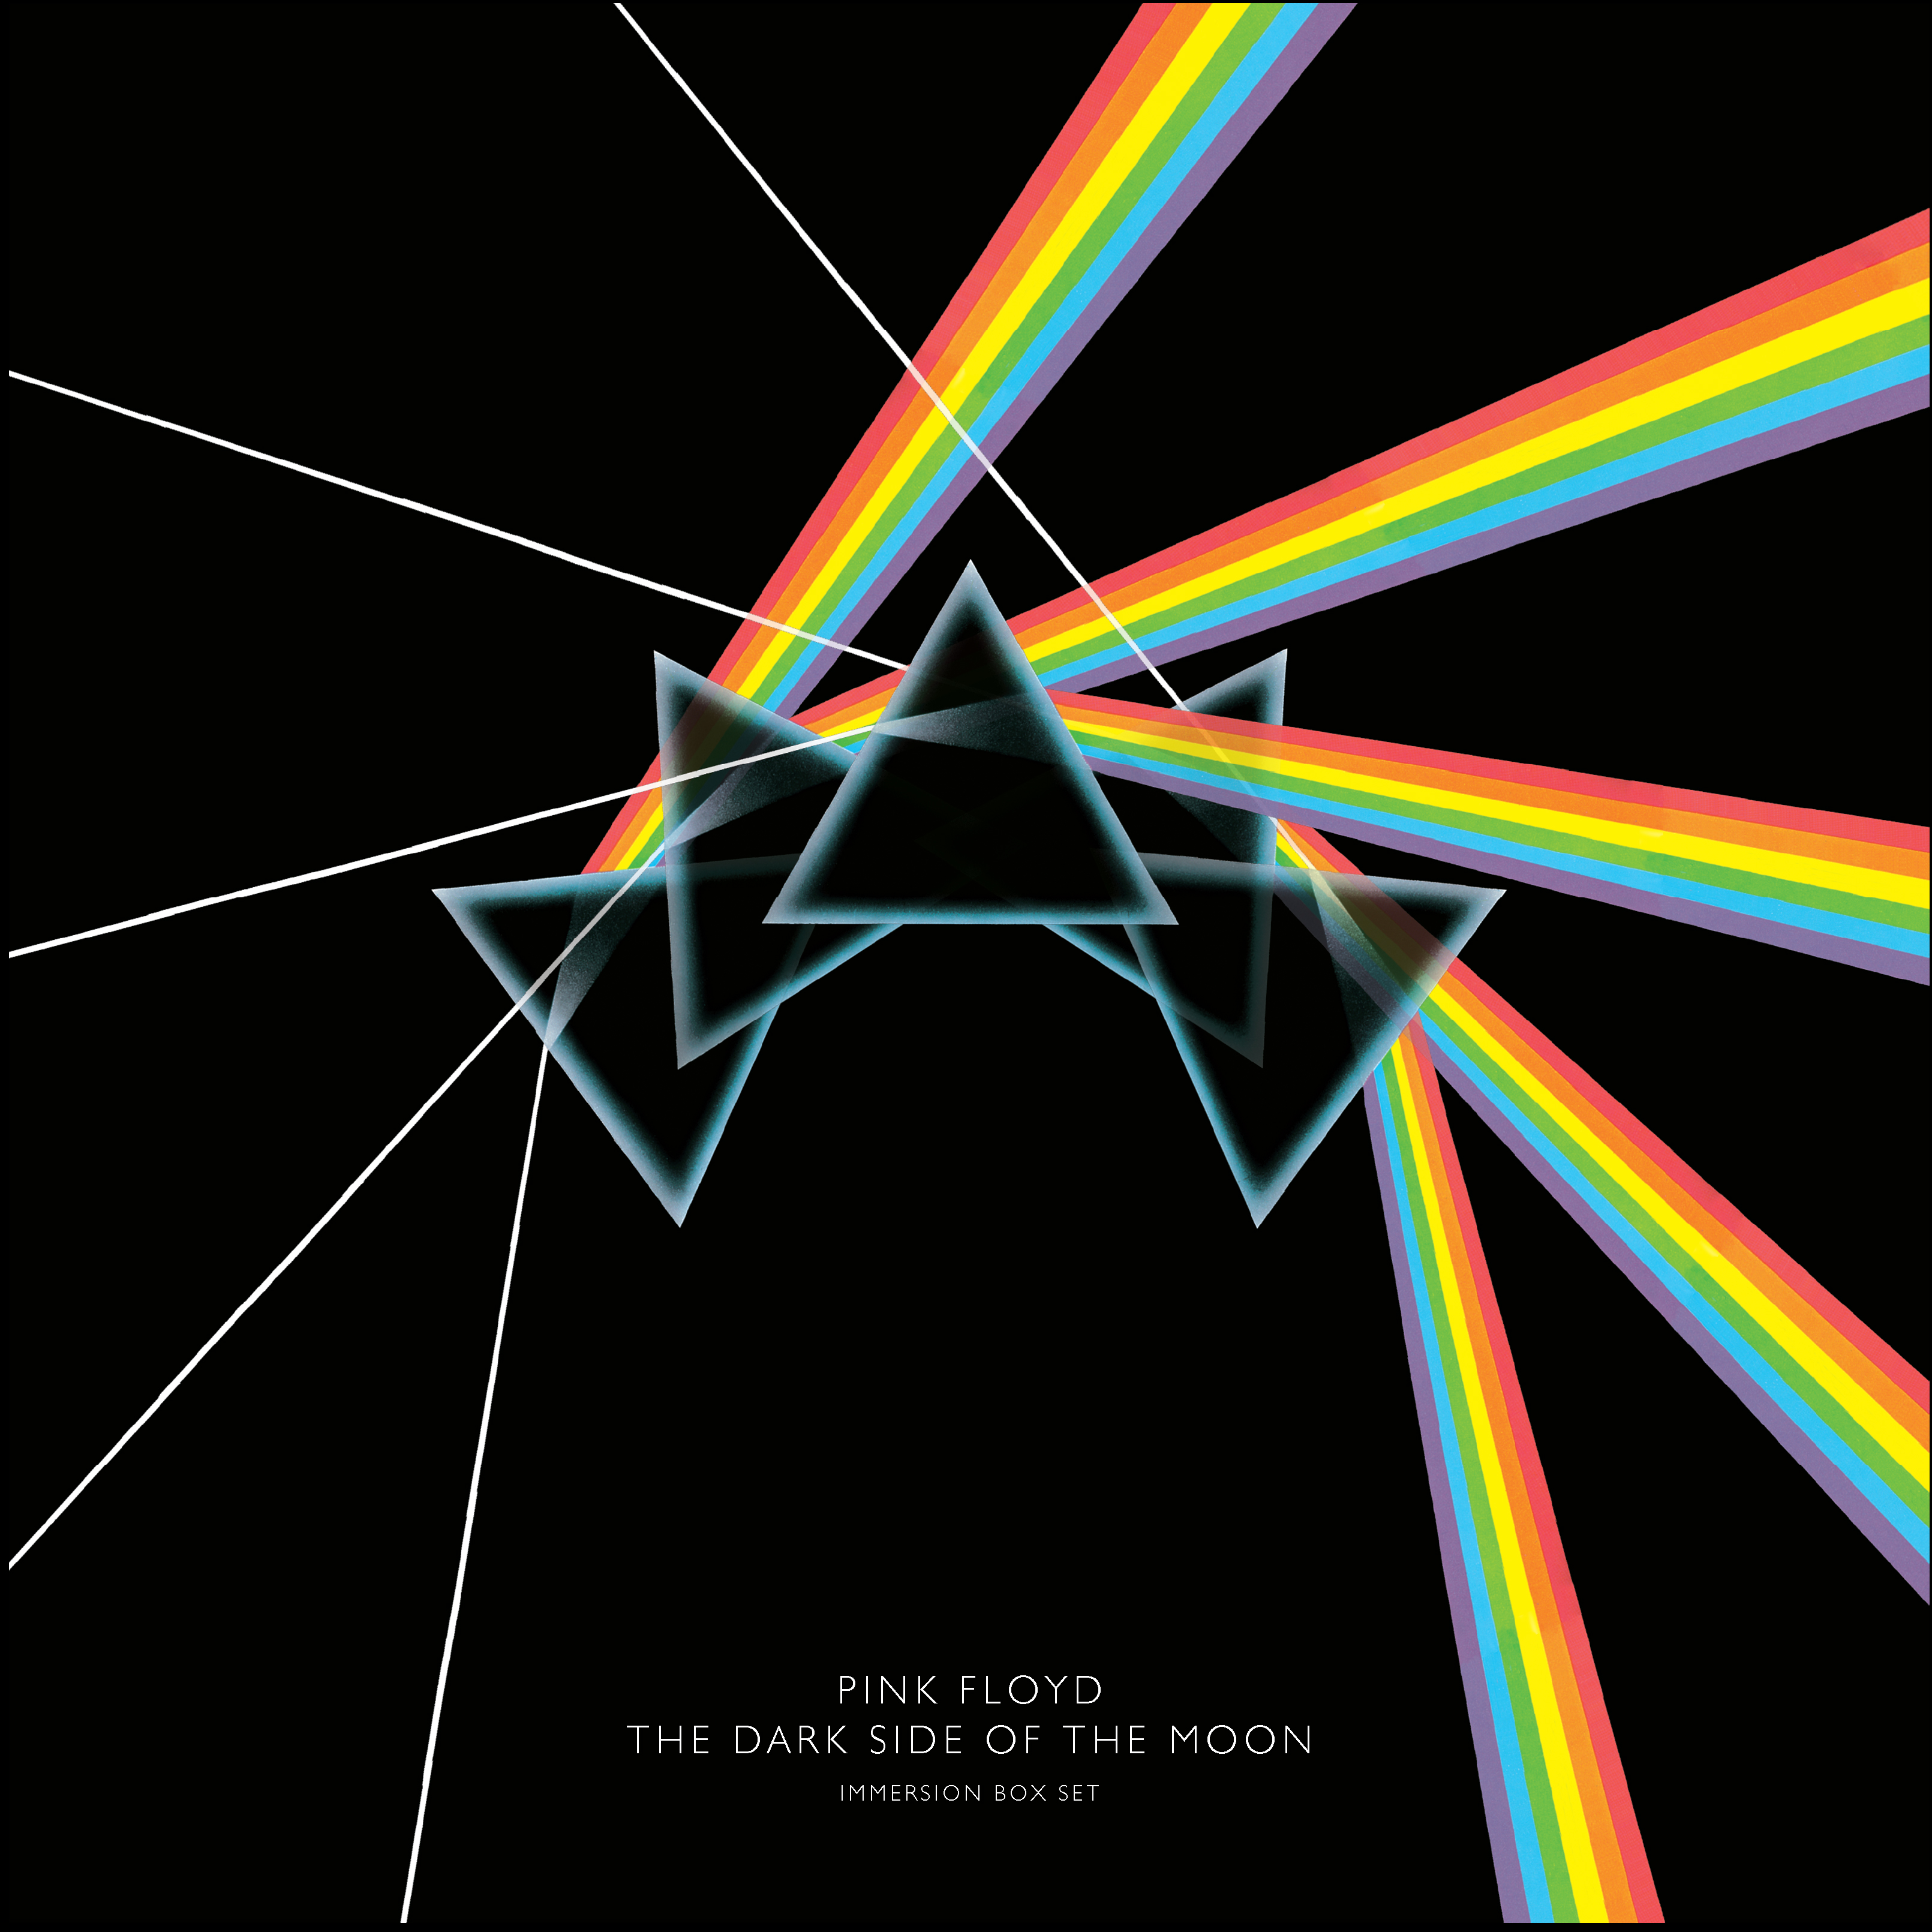 High Fidelity, First Class Pink Floyd's The Dark Side of the Moon